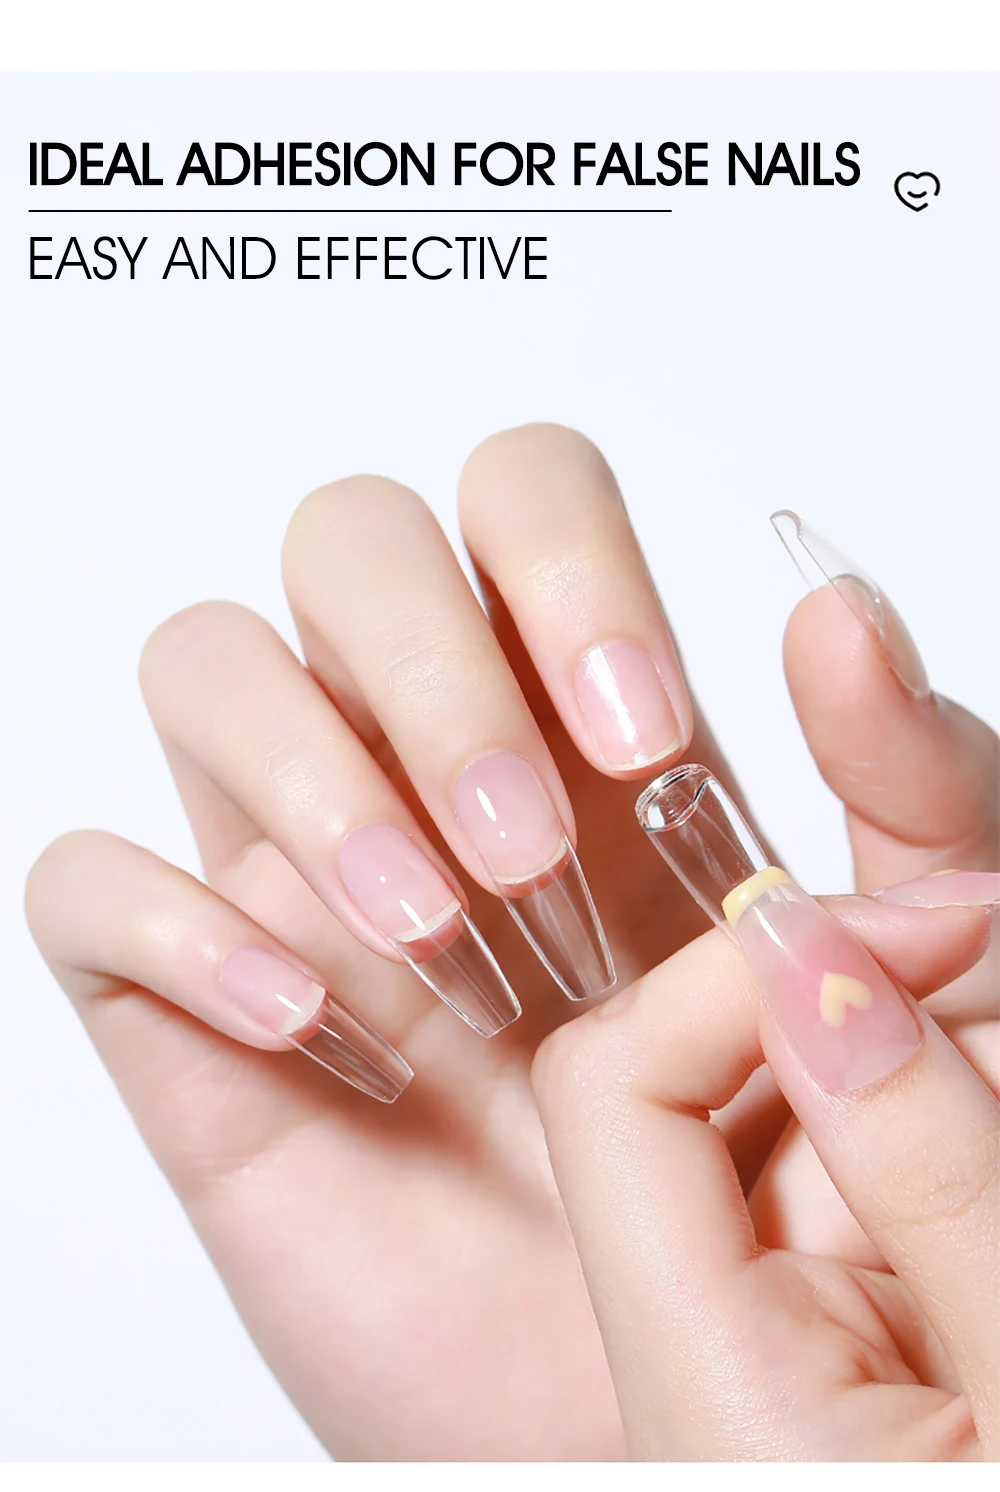 How To Apply Press On Nails (Tips and Tricks)